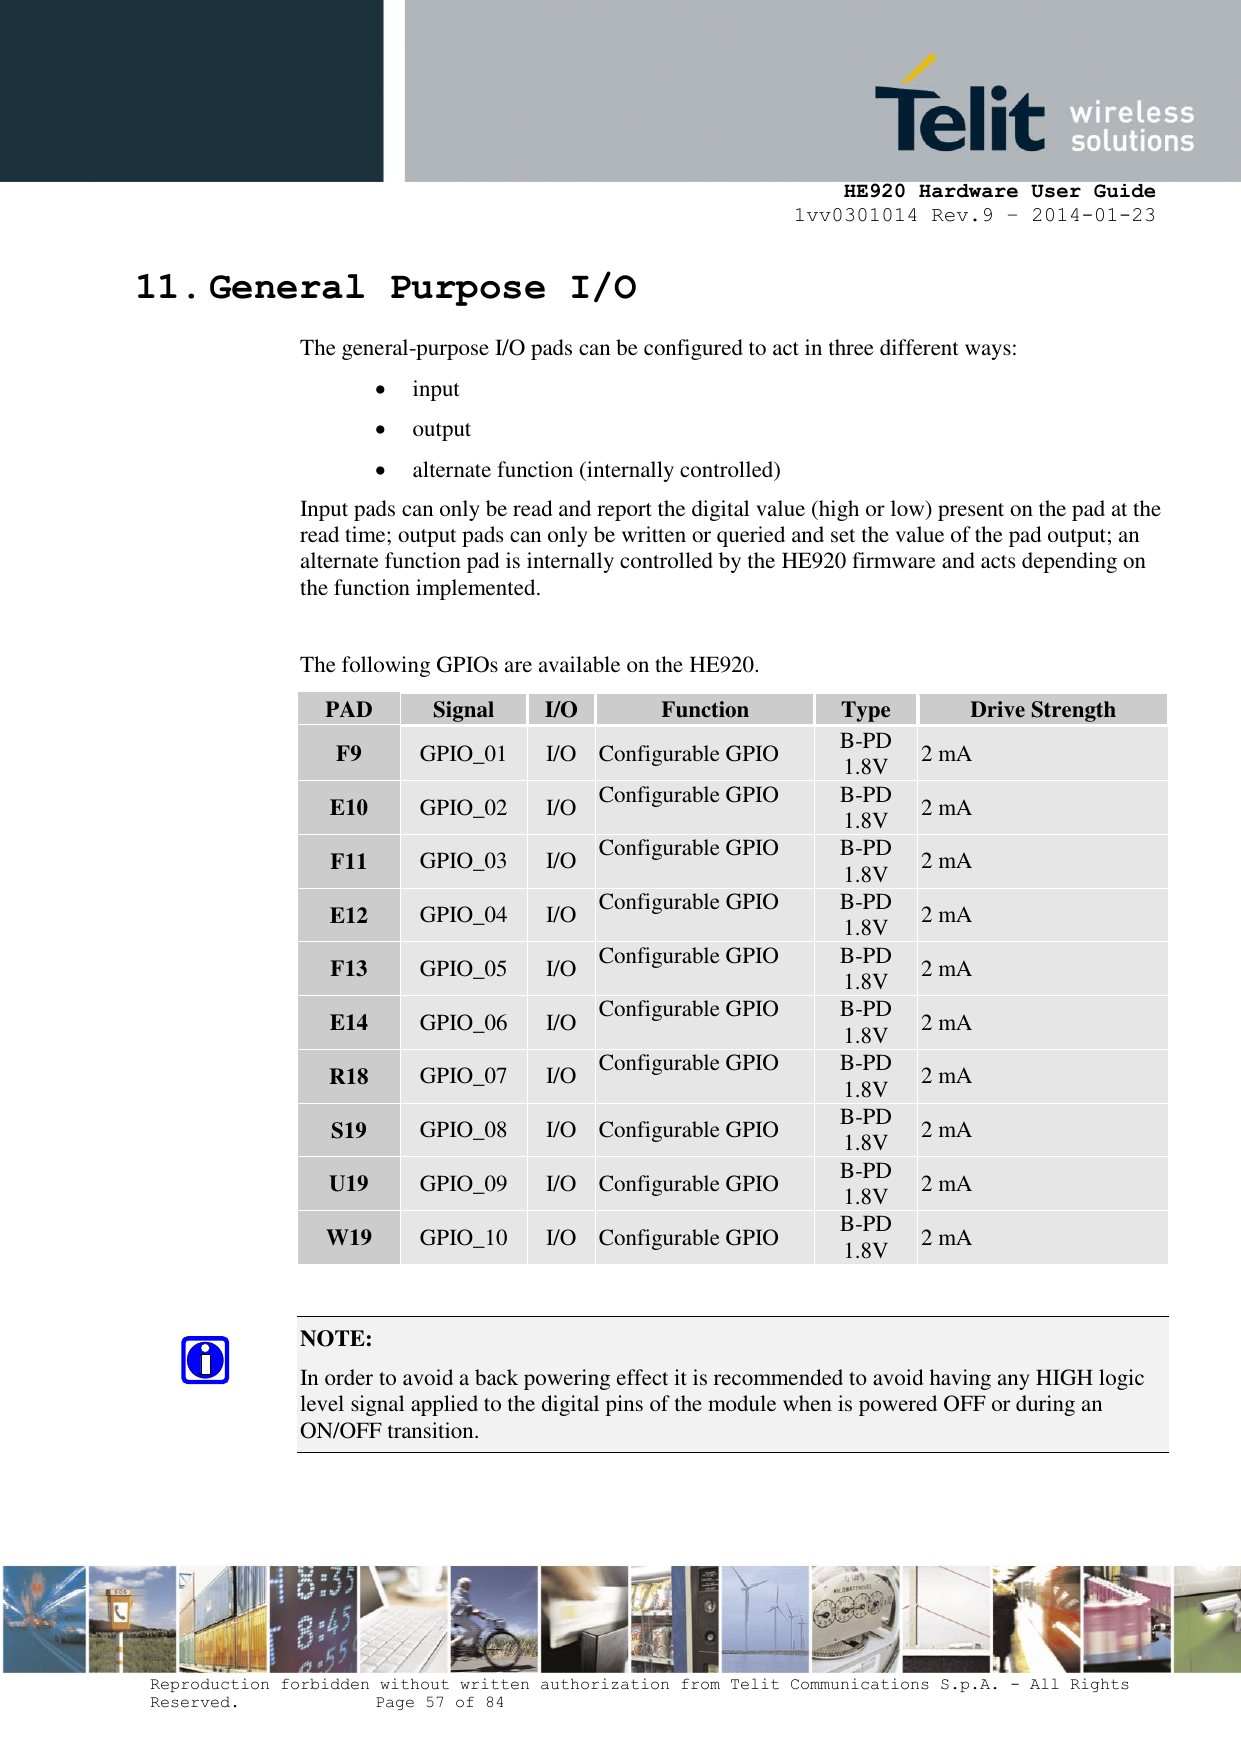     HE920 Hardware User Guide 1vv0301014 Rev.9 – 2014-01-23 Reproduction forbidden without written authorization from Telit Communications S.p.A. - All Rights Reserved.    Page 57 of 84  11. General Purpose I/O The general-purpose I/O pads can be configured to act in three different ways:  input  output  alternate function (internally controlled) Input pads can only be read and report the digital value (high or low) present on the pad at the read time; output pads can only be written or queried and set the value of the pad output; an alternate function pad is internally controlled by the HE920 firmware and acts depending on the function implemented.  The following GPIOs are available on the HE920. PAD Signal I/O Function Type Drive Strength F9 GPIO_01 I/O Configurable GPIO B-PD 1.8V 2 mA E10 GPIO_02 I/O Configurable GPIO B-PD 1.8V 2 mA F11 GPIO_03 I/O Configurable GPIO B-PD 1.8V 2 mA E12 GPIO_04 I/O Configurable GPIO B-PD 1.8V 2 mA F13 GPIO_05 I/O Configurable GPIO B-PD 1.8V 2 mA E14 GPIO_06 I/O Configurable GPIO B-PD 1.8V 2 mA R18 GPIO_07 I/O Configurable GPIO B-PD 1.8V 2 mA S19 GPIO_08 I/O Configurable GPIO B-PD 1.8V 2 mA U19 GPIO_09 I/O Configurable GPIO B-PD 1.8V 2 mA W19 GPIO_10 I/O Configurable GPIO B-PD 1.8V 2 mA  NOTE:  In order to avoid a back powering effect it is recommended to avoid having any HIGH logic level signal applied to the digital pins of the module when is powered OFF or during an ON/OFF transition.   